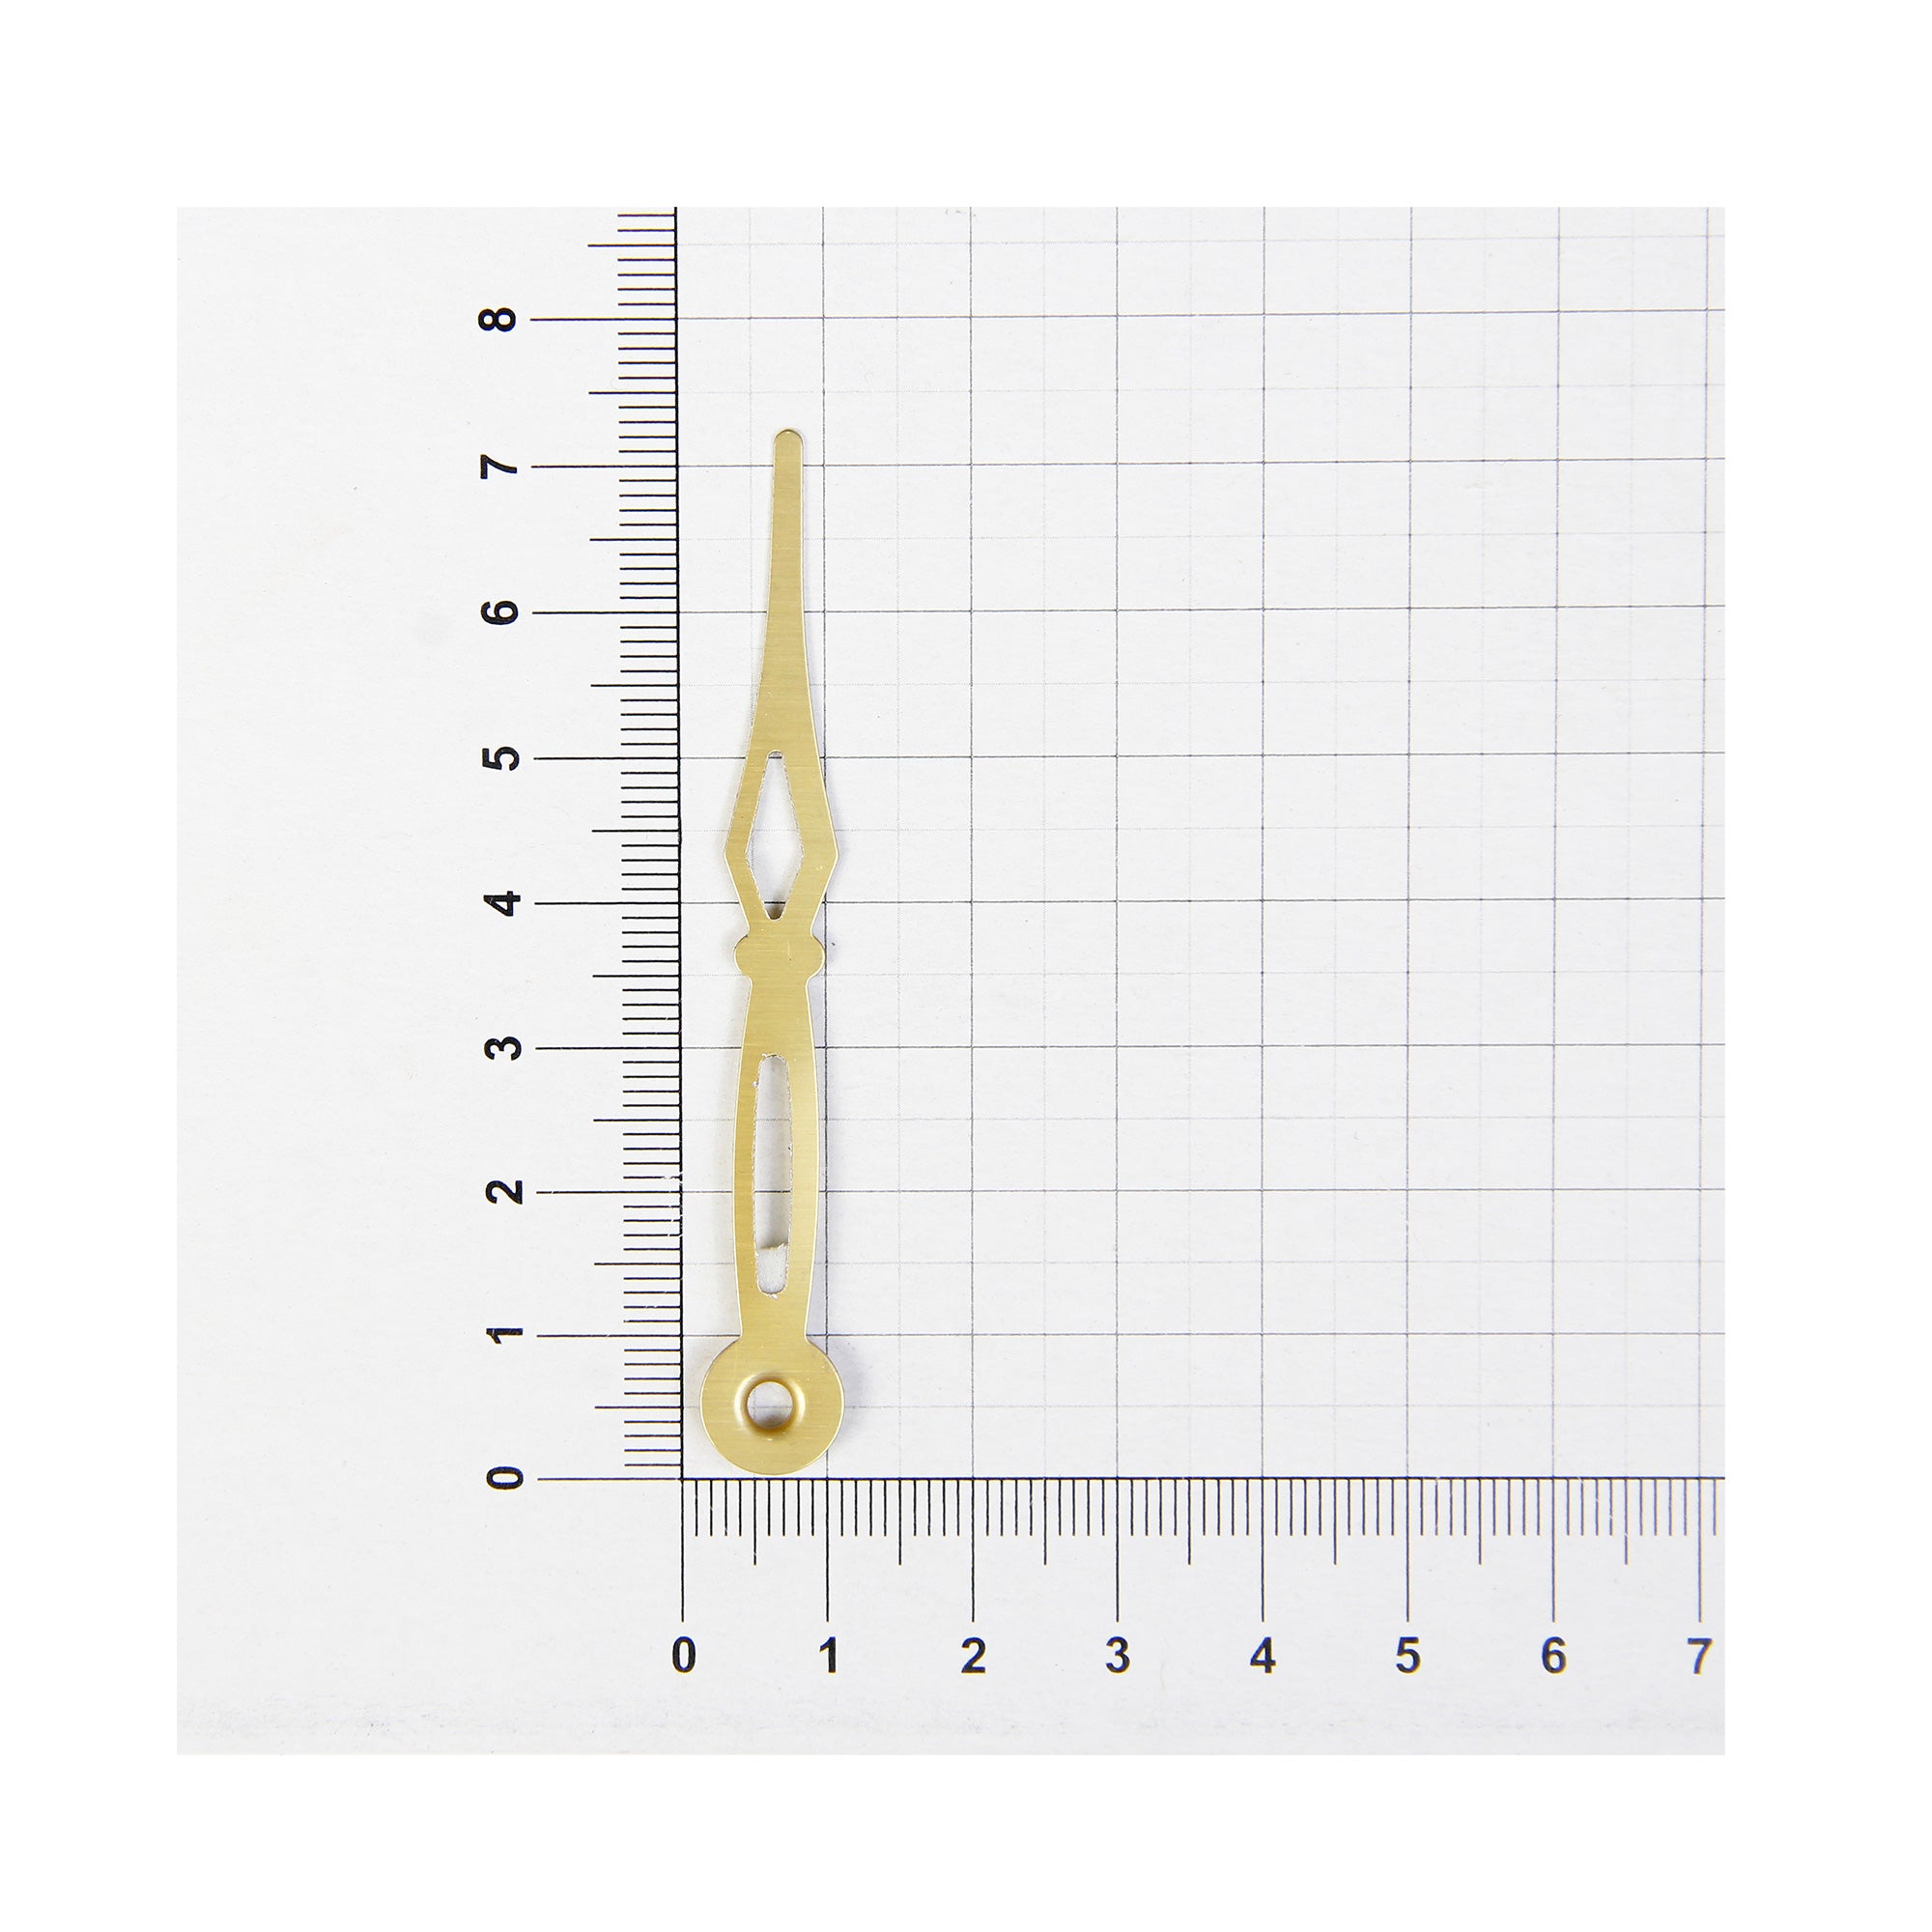 Clock Hands Hour And Minute Dimond Gold Hour 5.7Cm; Minute 7.4Cm 2Pc Pbci Ib